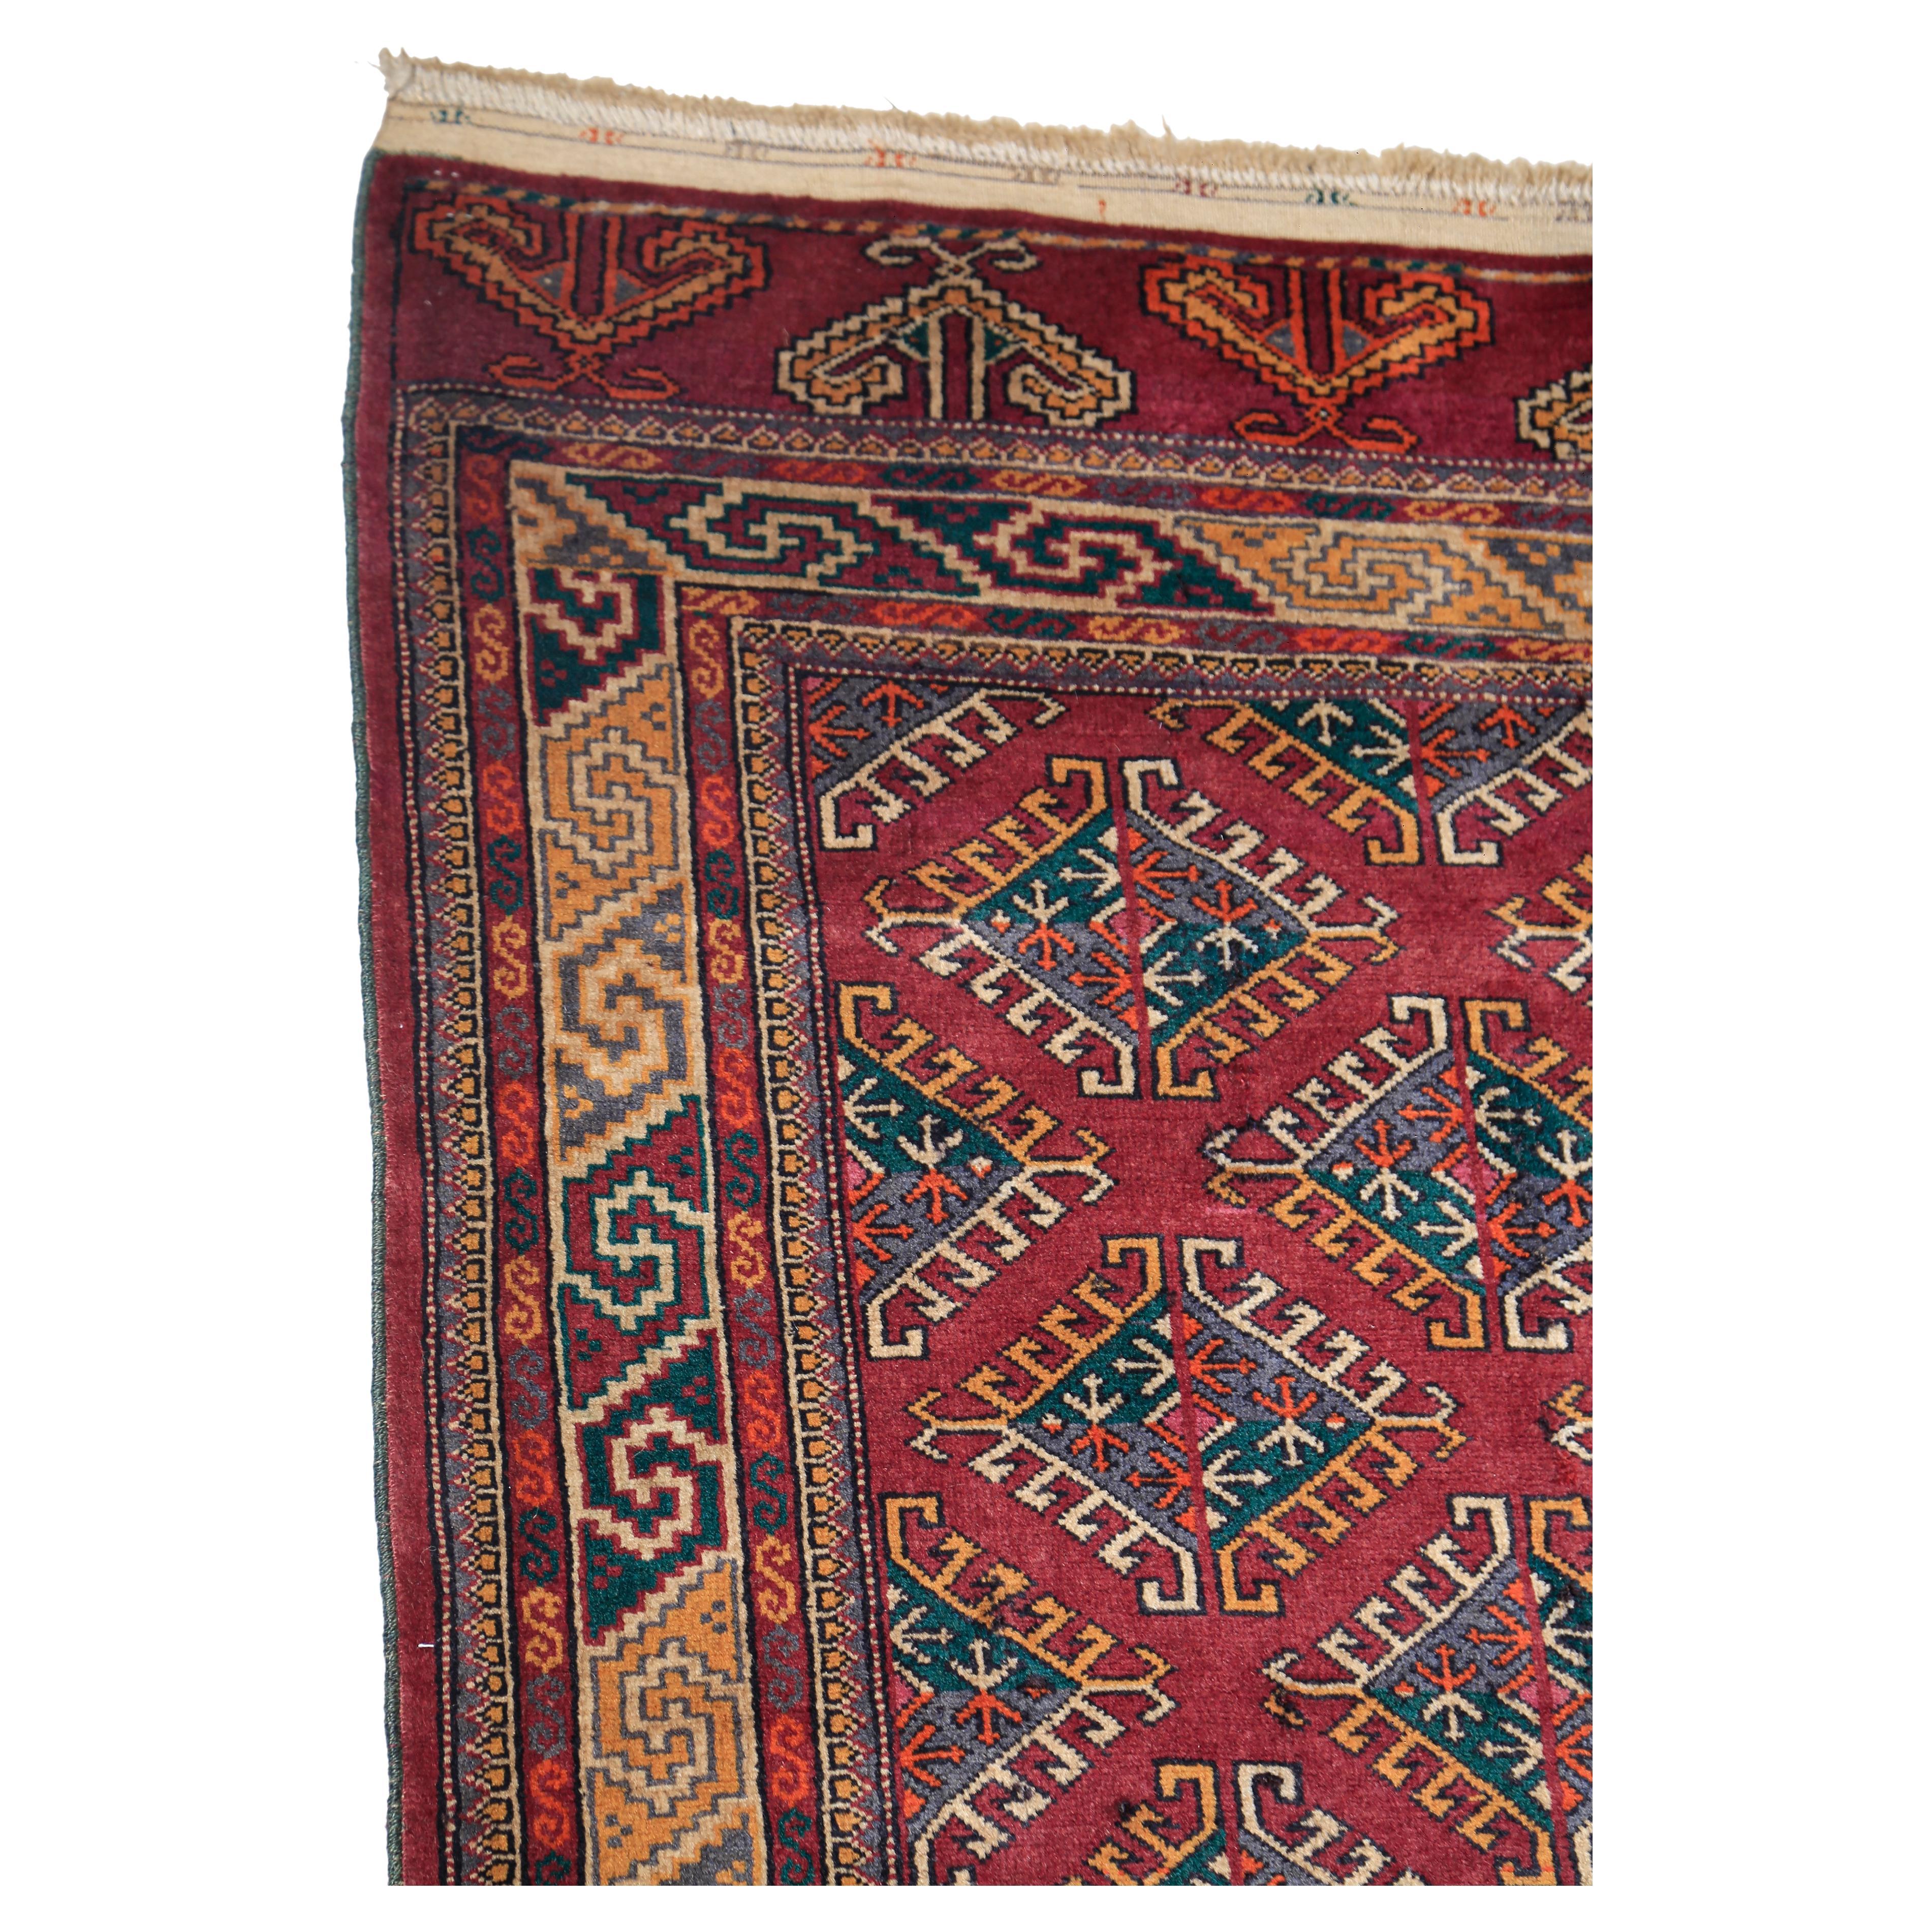 An example of a particularly sparkling, dynamic Yomud woven by a tribal woman circa 1950. The borders – both outer and inner, deserve some careful inspection, excellent condition. What makes this piece so pleasing to us, is the unusually wide color